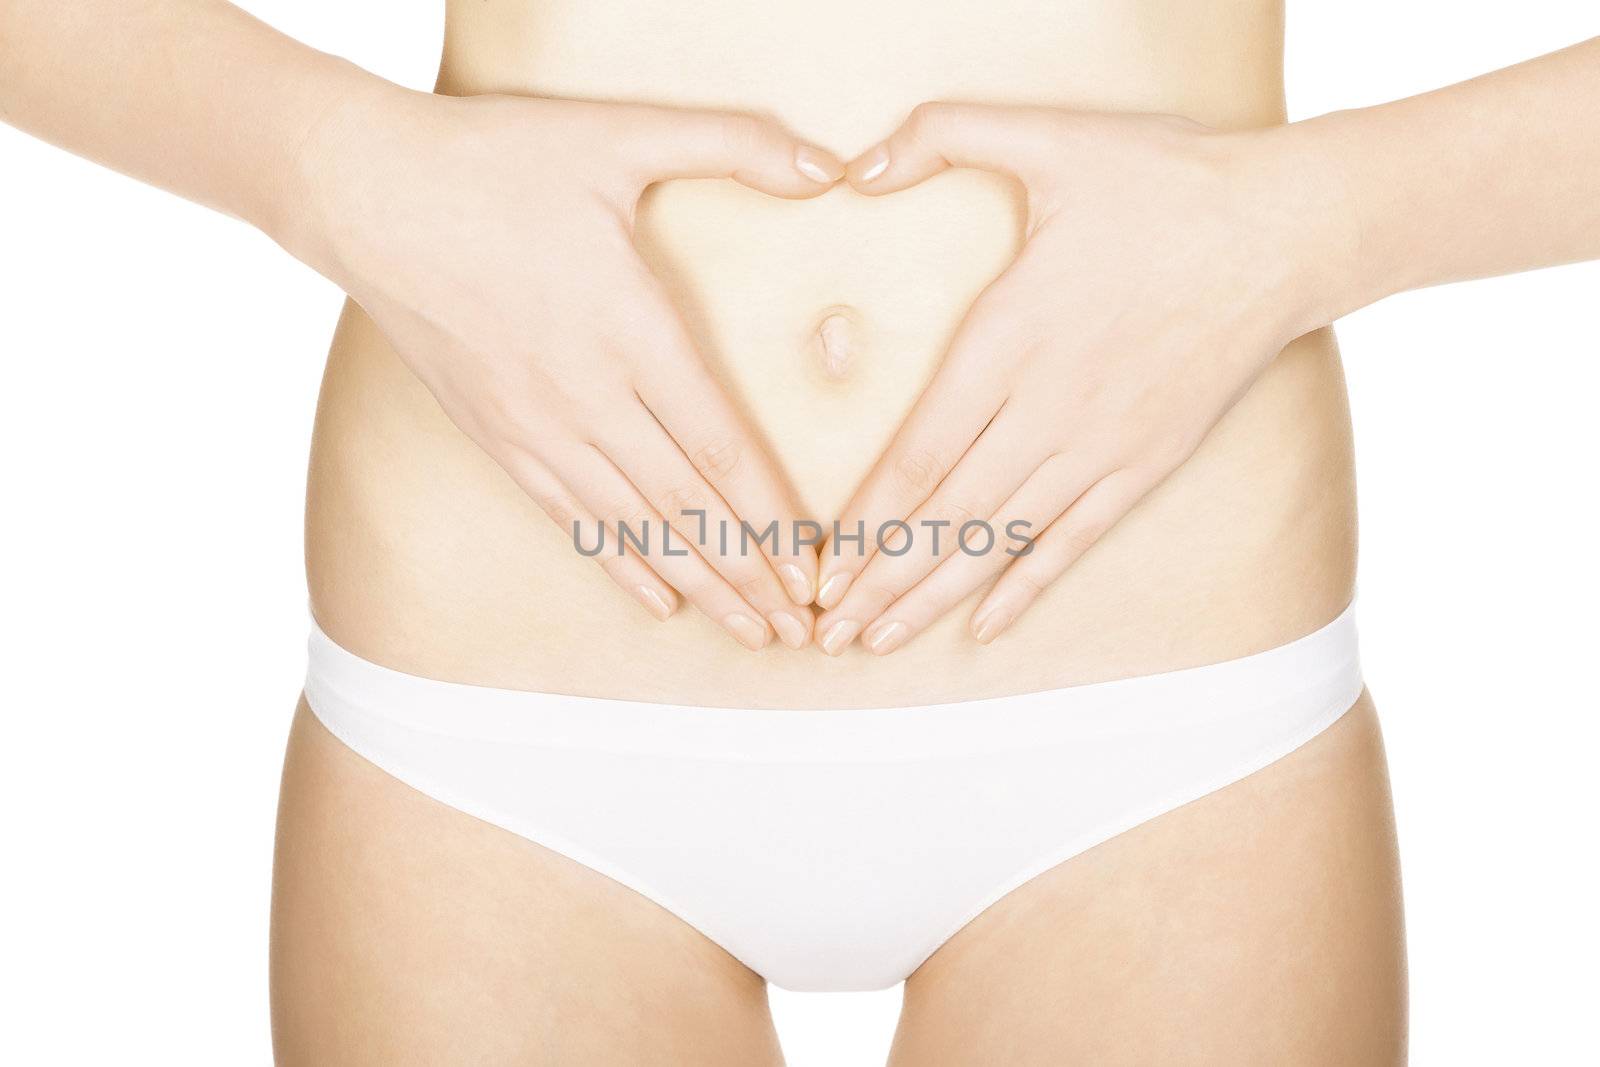 woman's hands forming a heart symbol on the belly